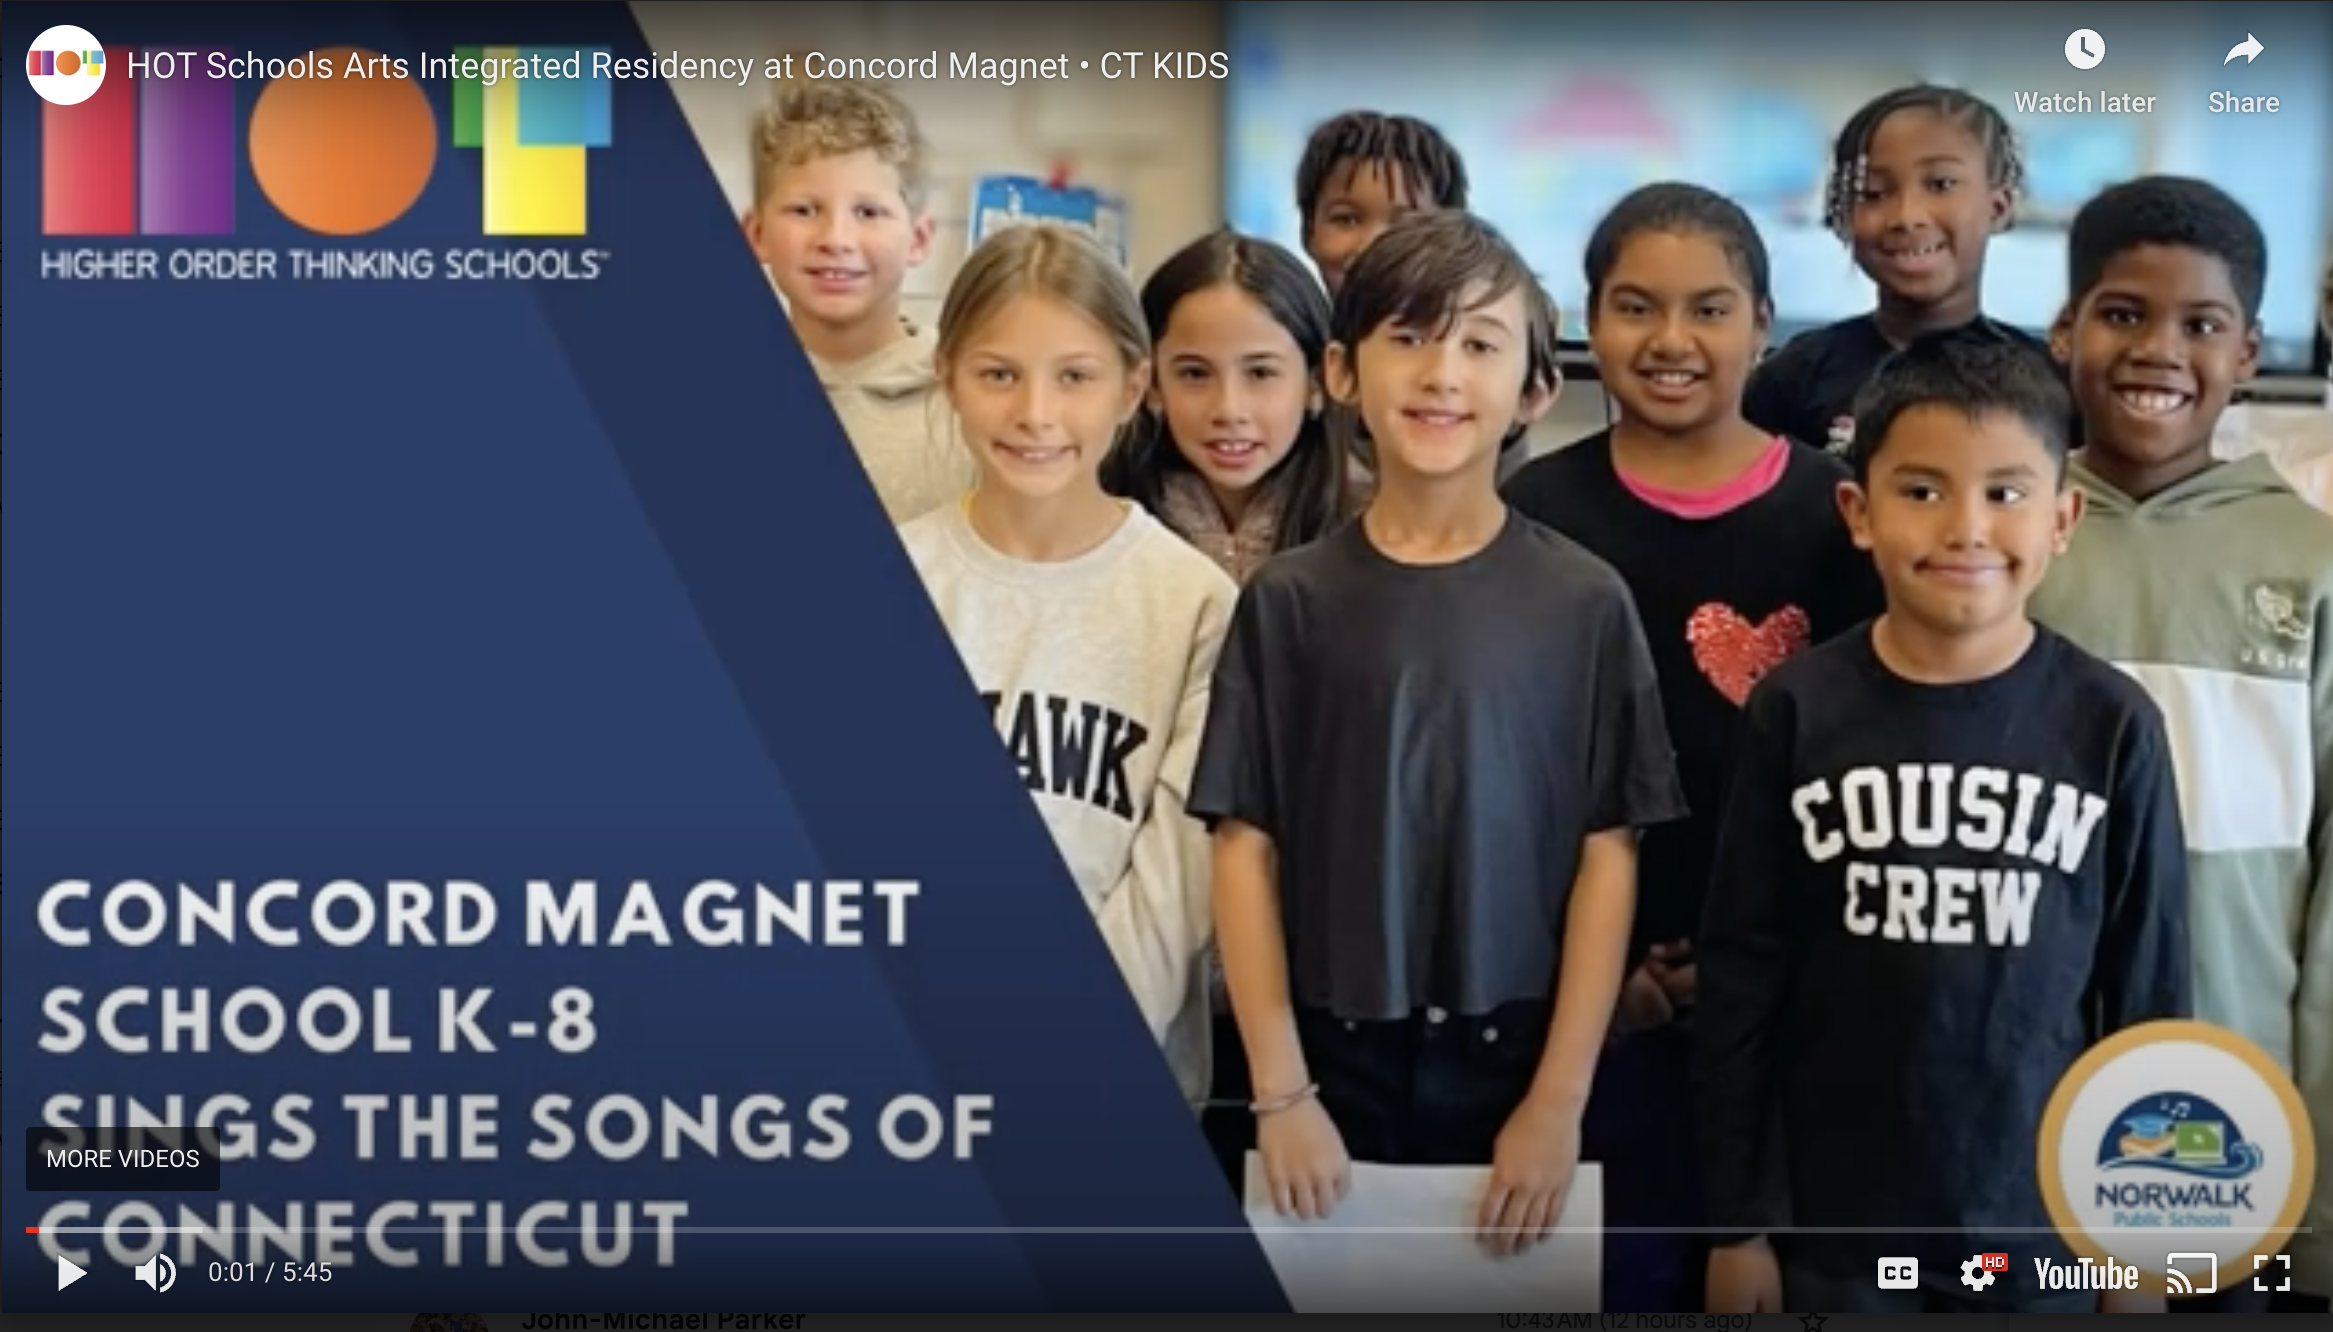 Check out this HOT Schools Arts Integrated Residency at Concord Magnet: CT KIDS